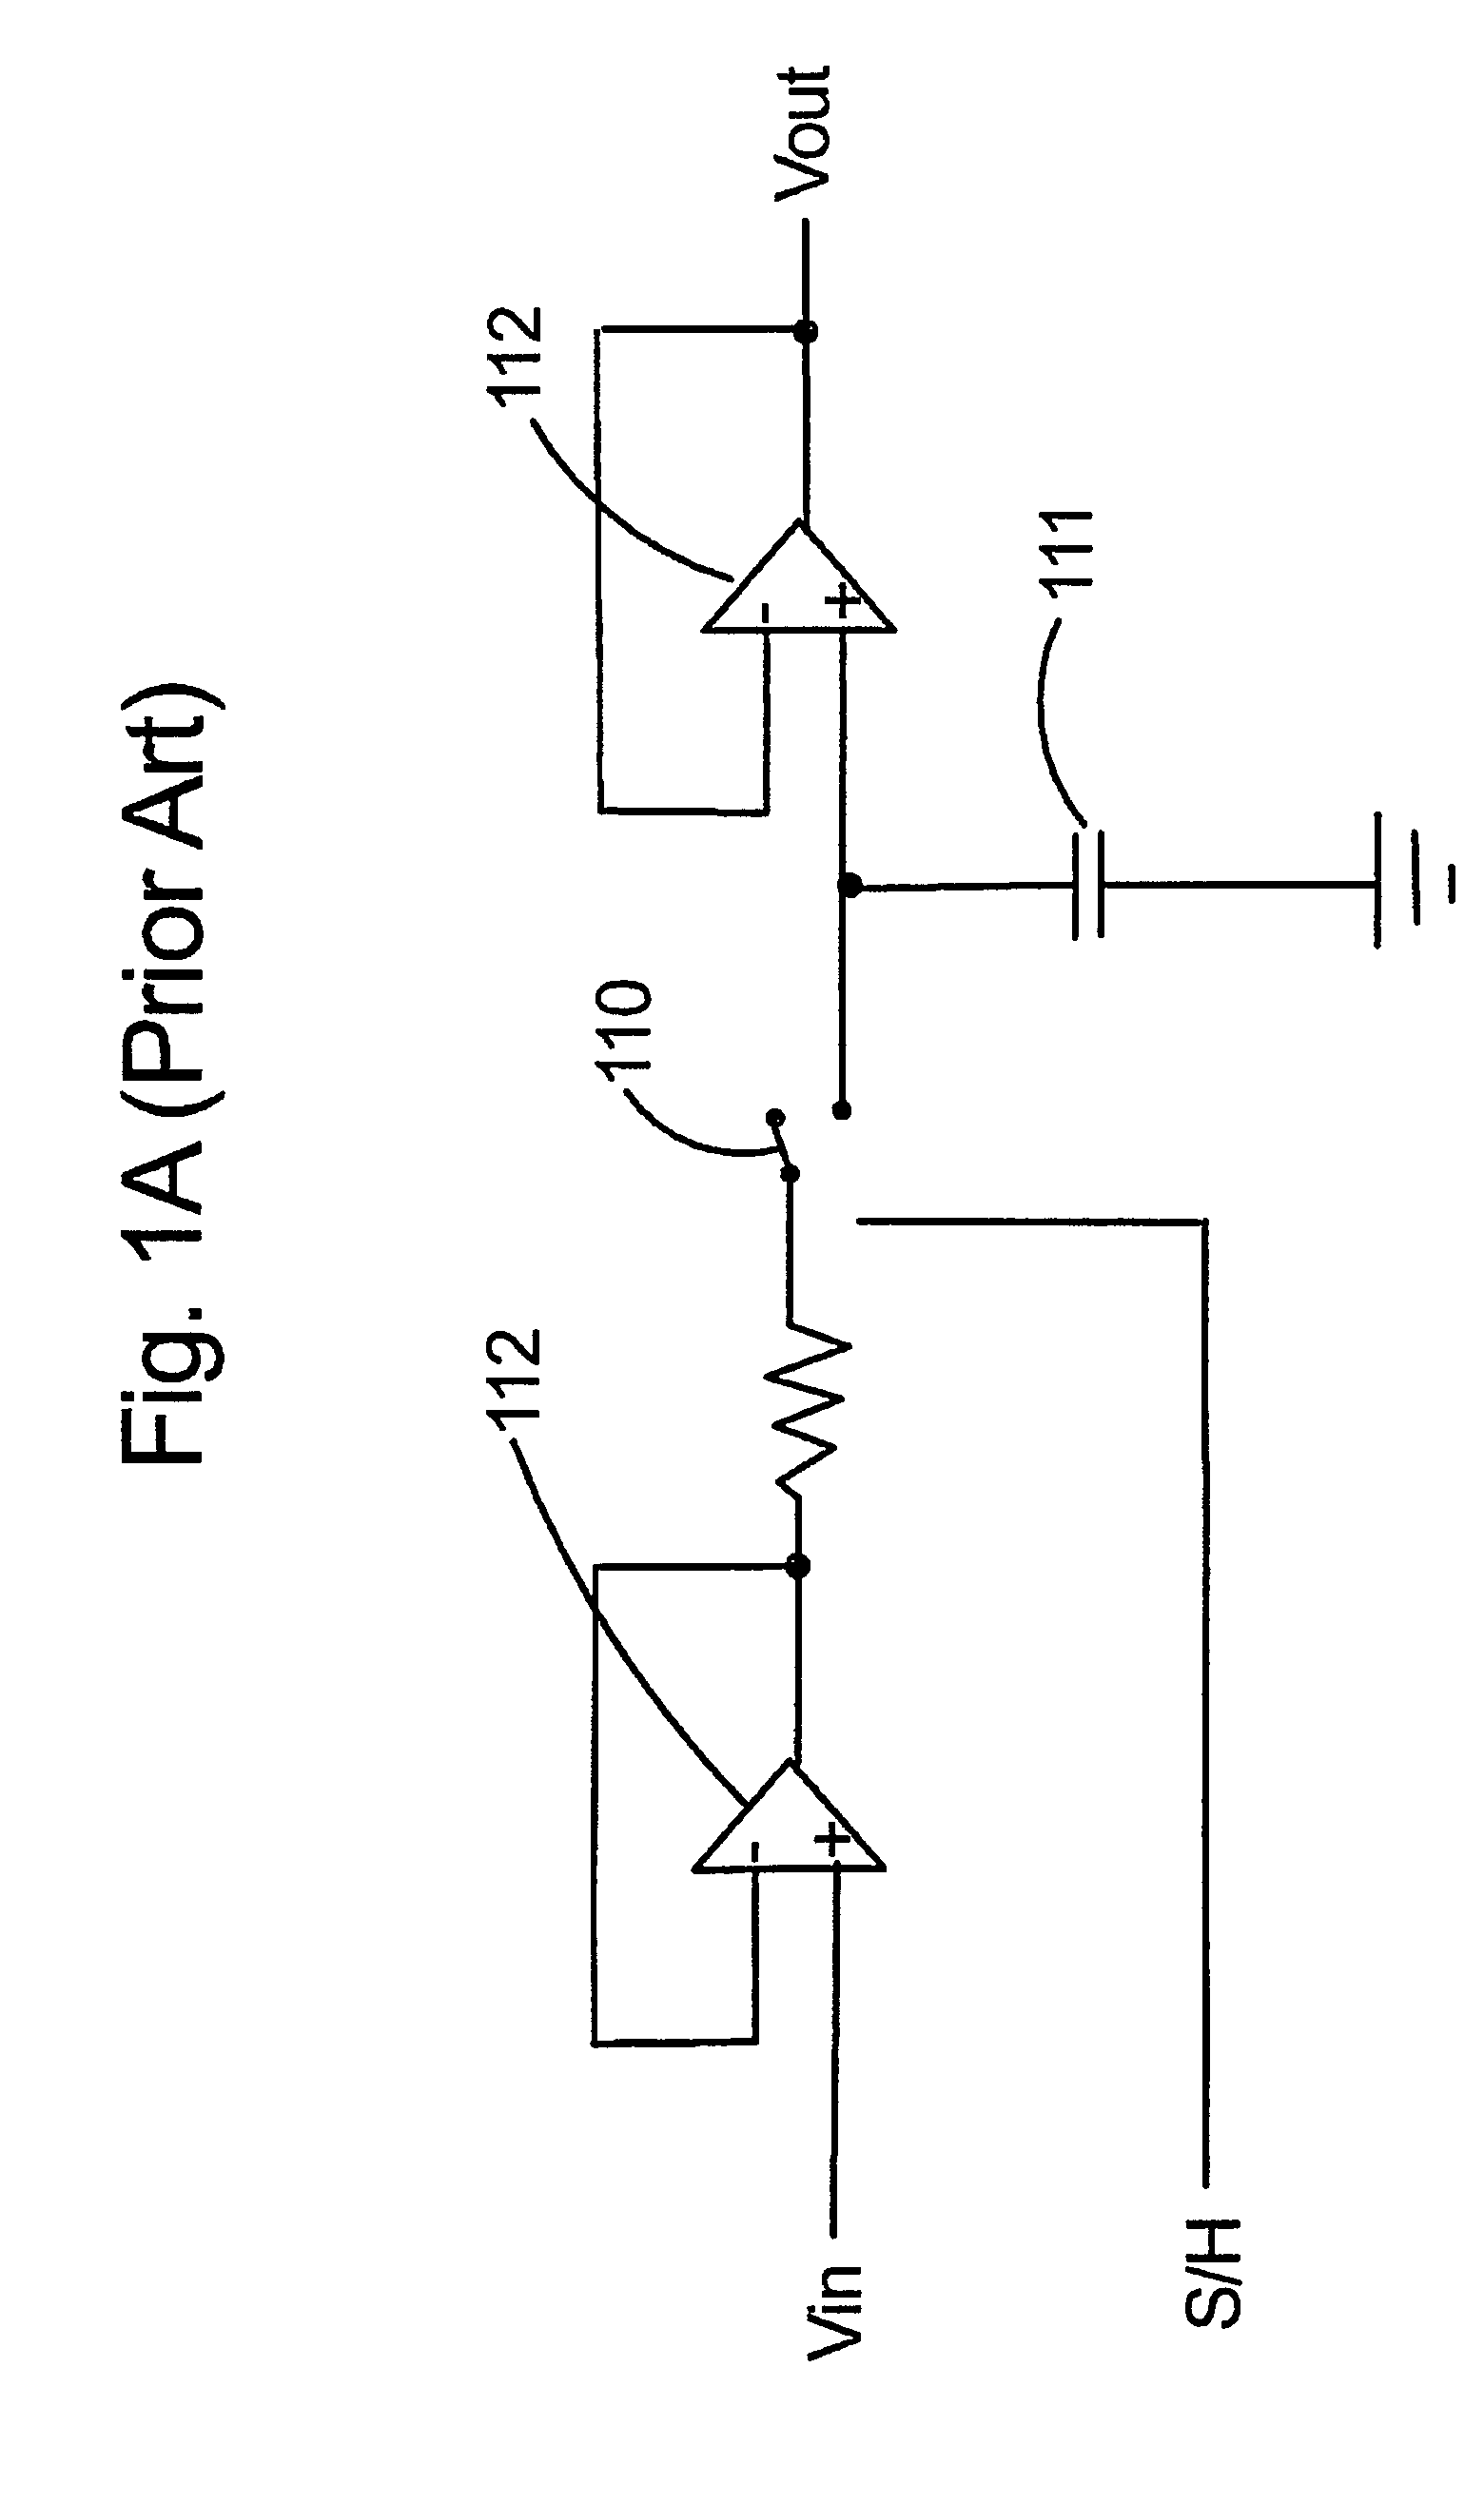 Variable sized aperture window of an analog-to-digital converter